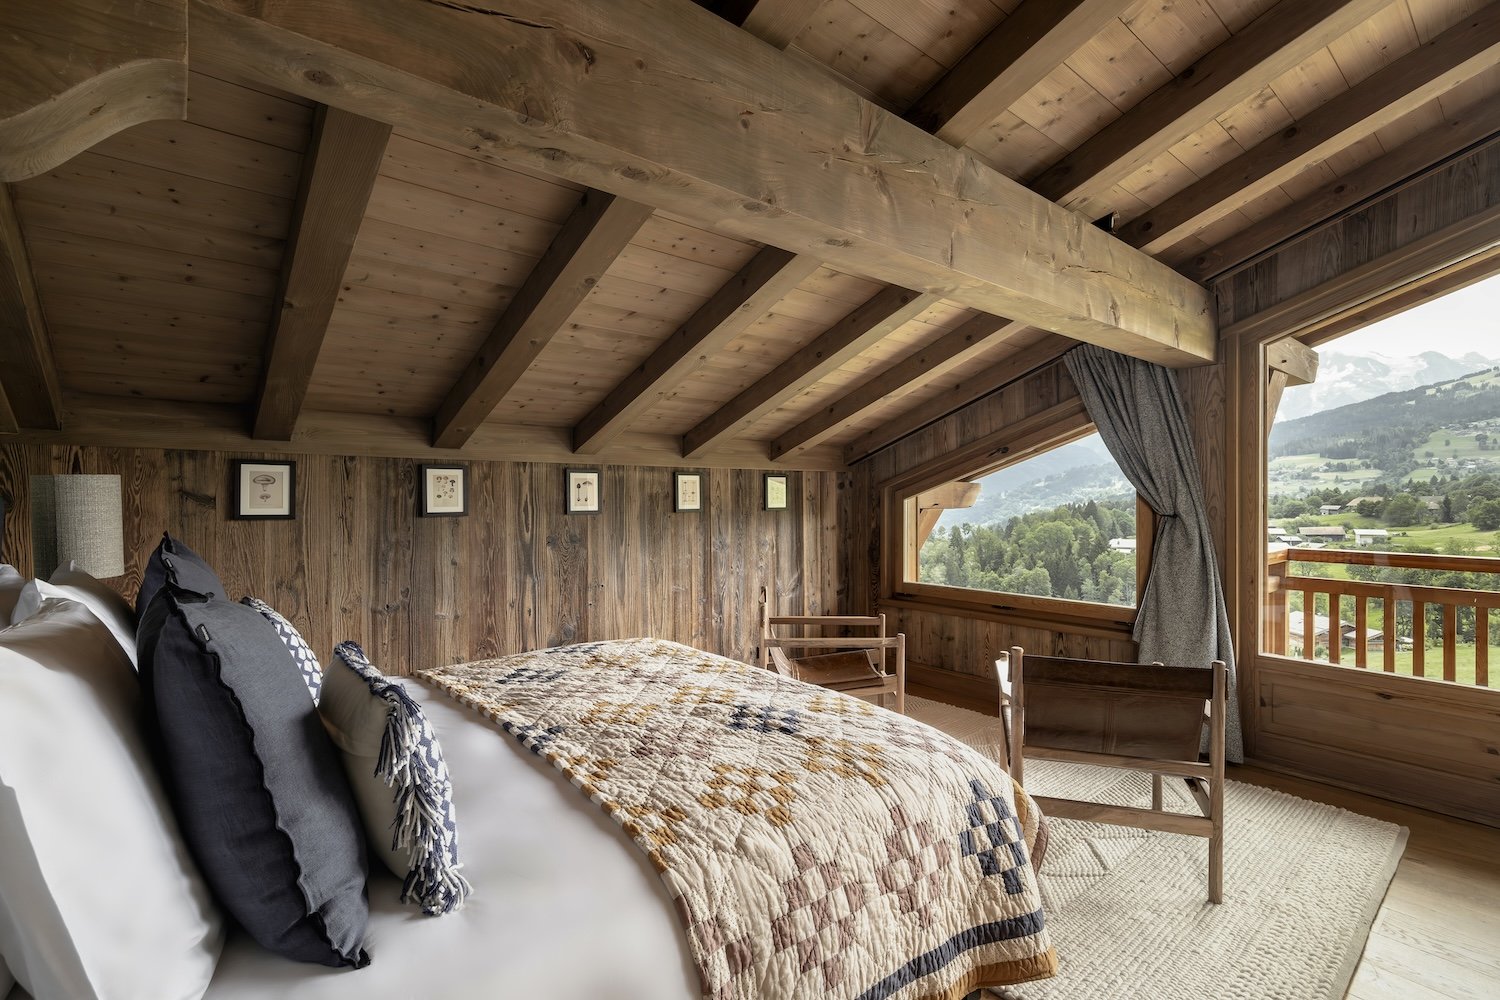 Francis+York+Discover This Luxury Chalet in the French Alps From The August Premium Collection 00067.jpg